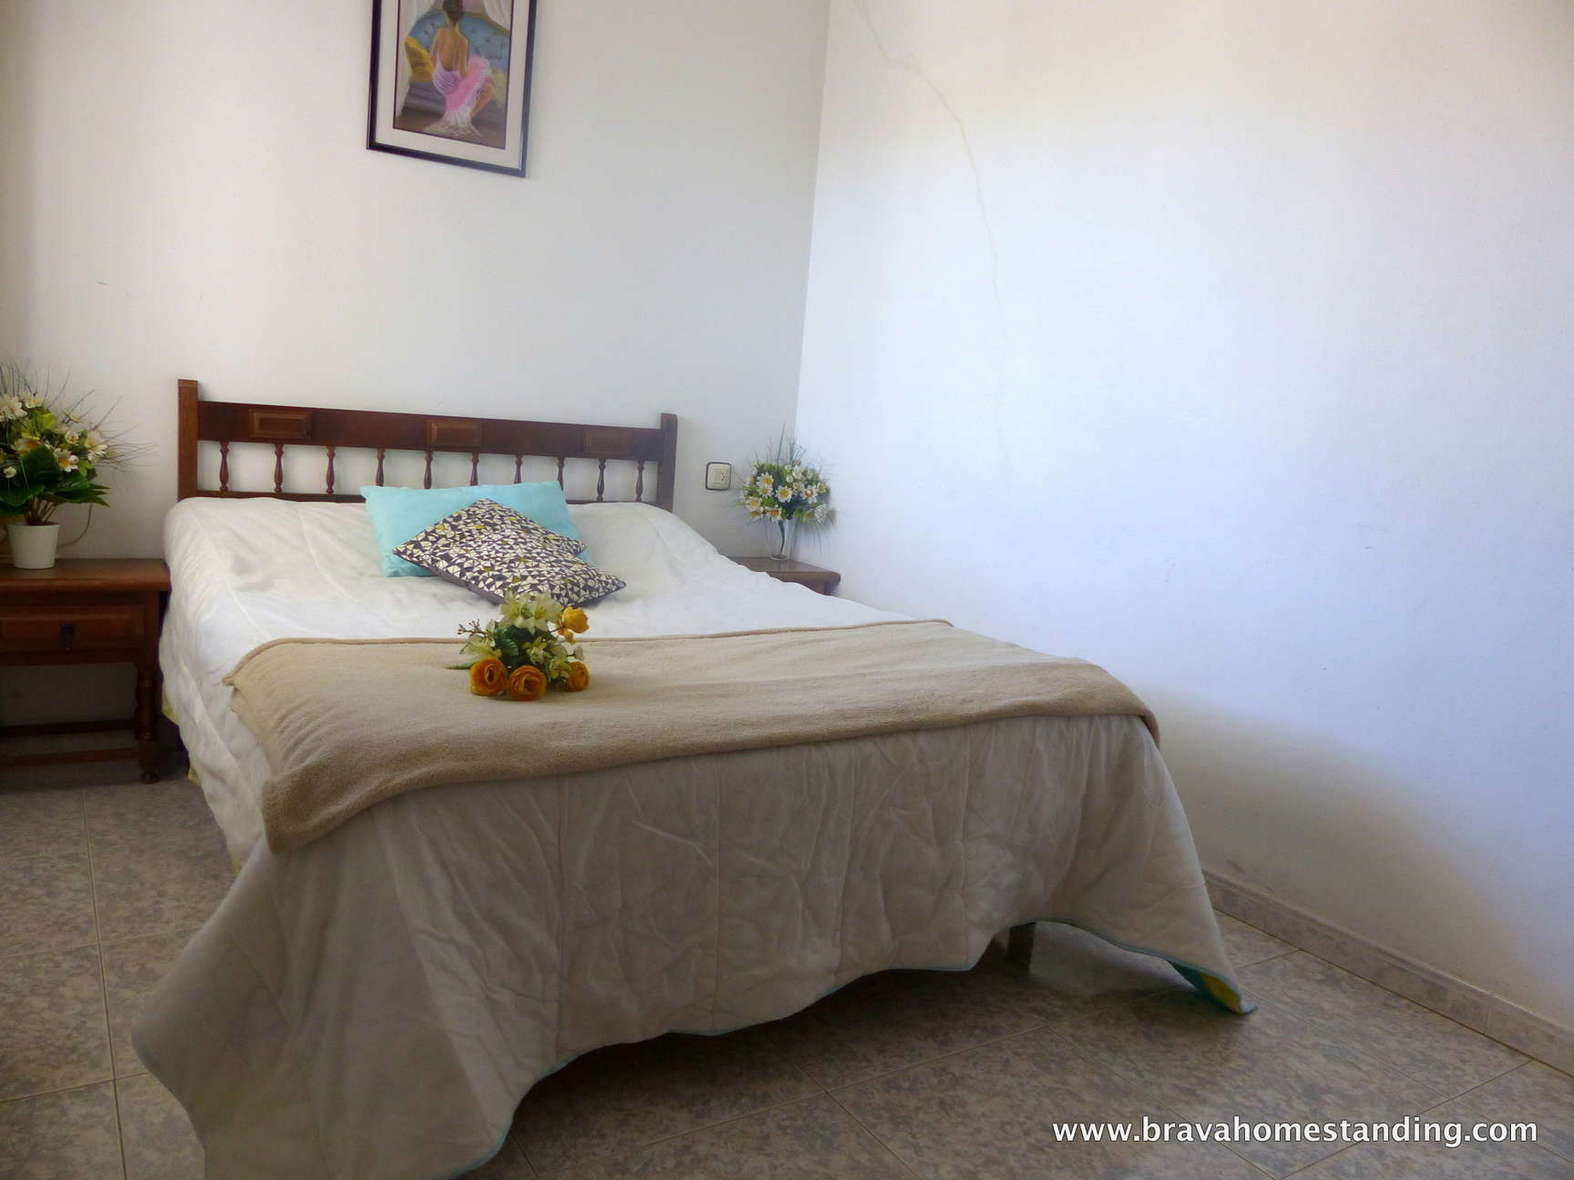 EMPURIABRAVA: Nice apartment with views on the canal